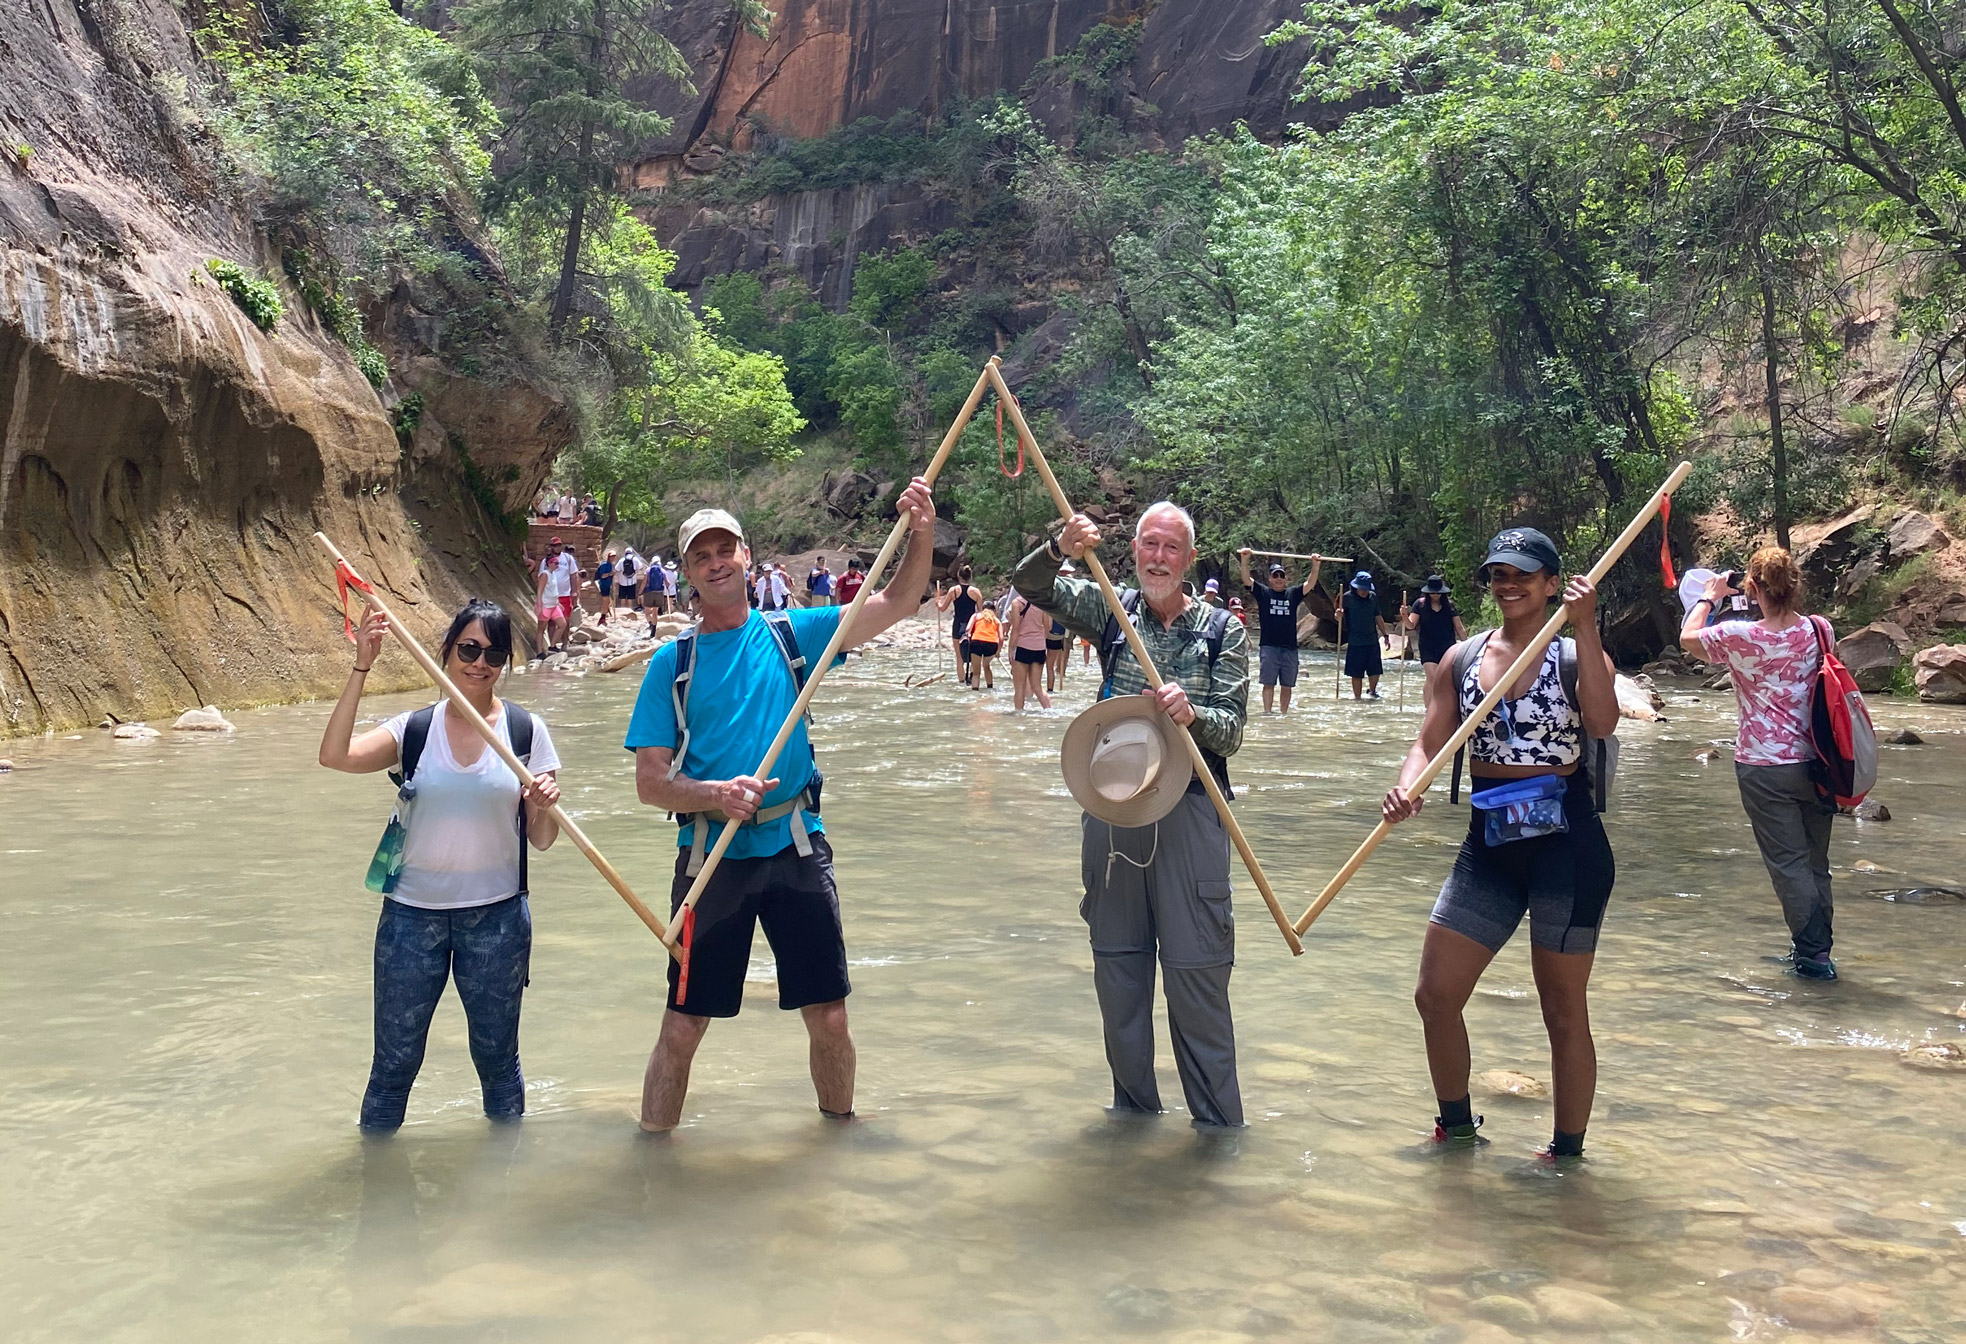 group of chaperones holding wooden poles and posing in a river